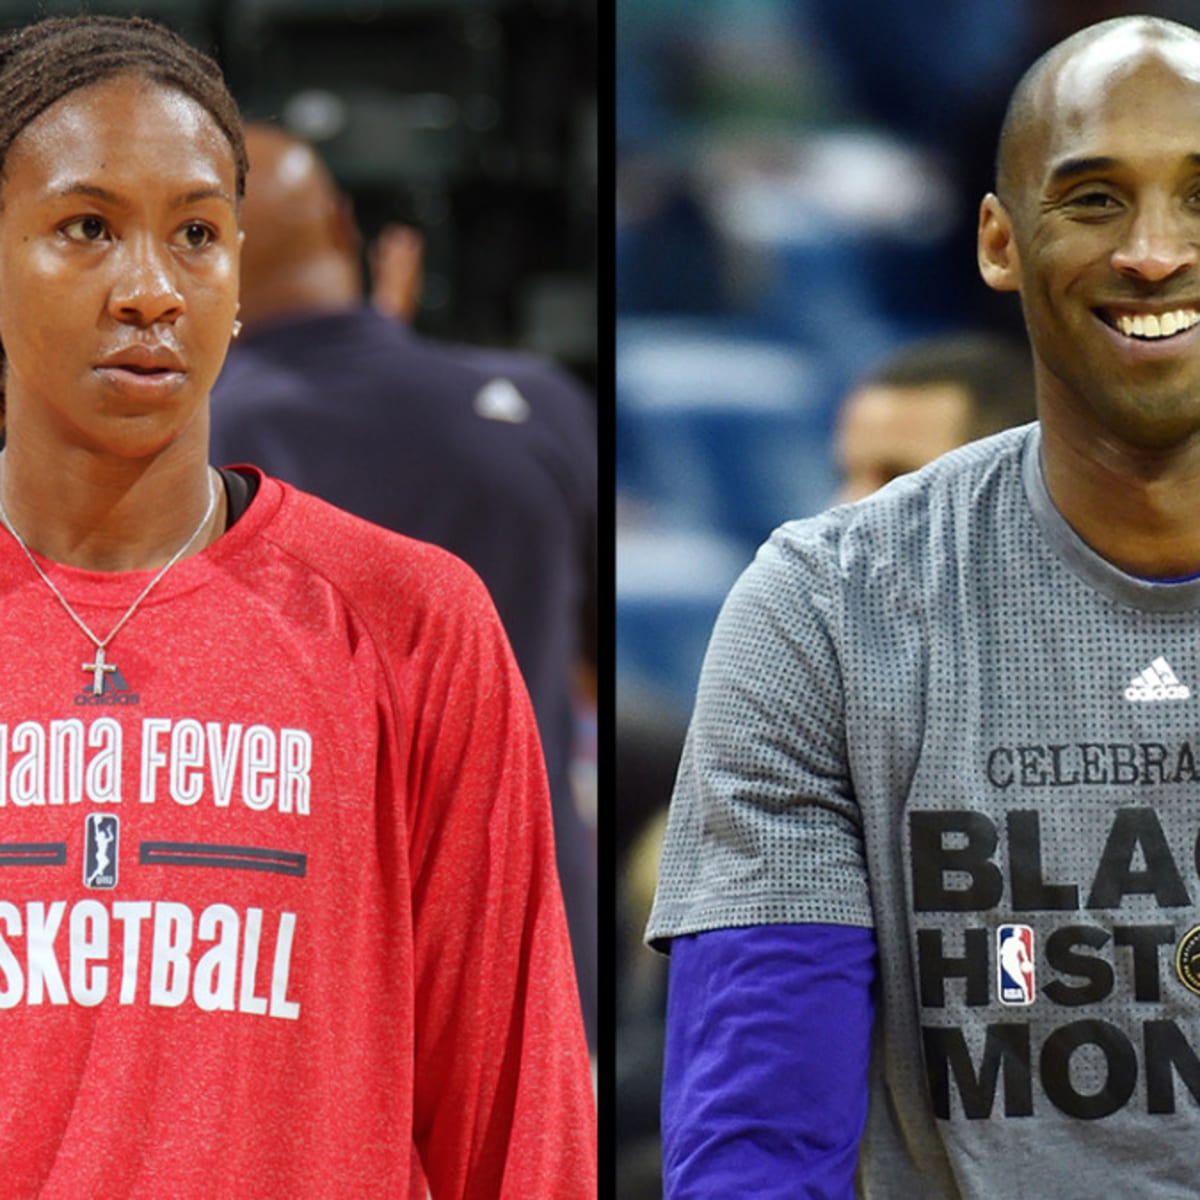 The unlikely bond of Kobe Bryant and Tamika Catchings